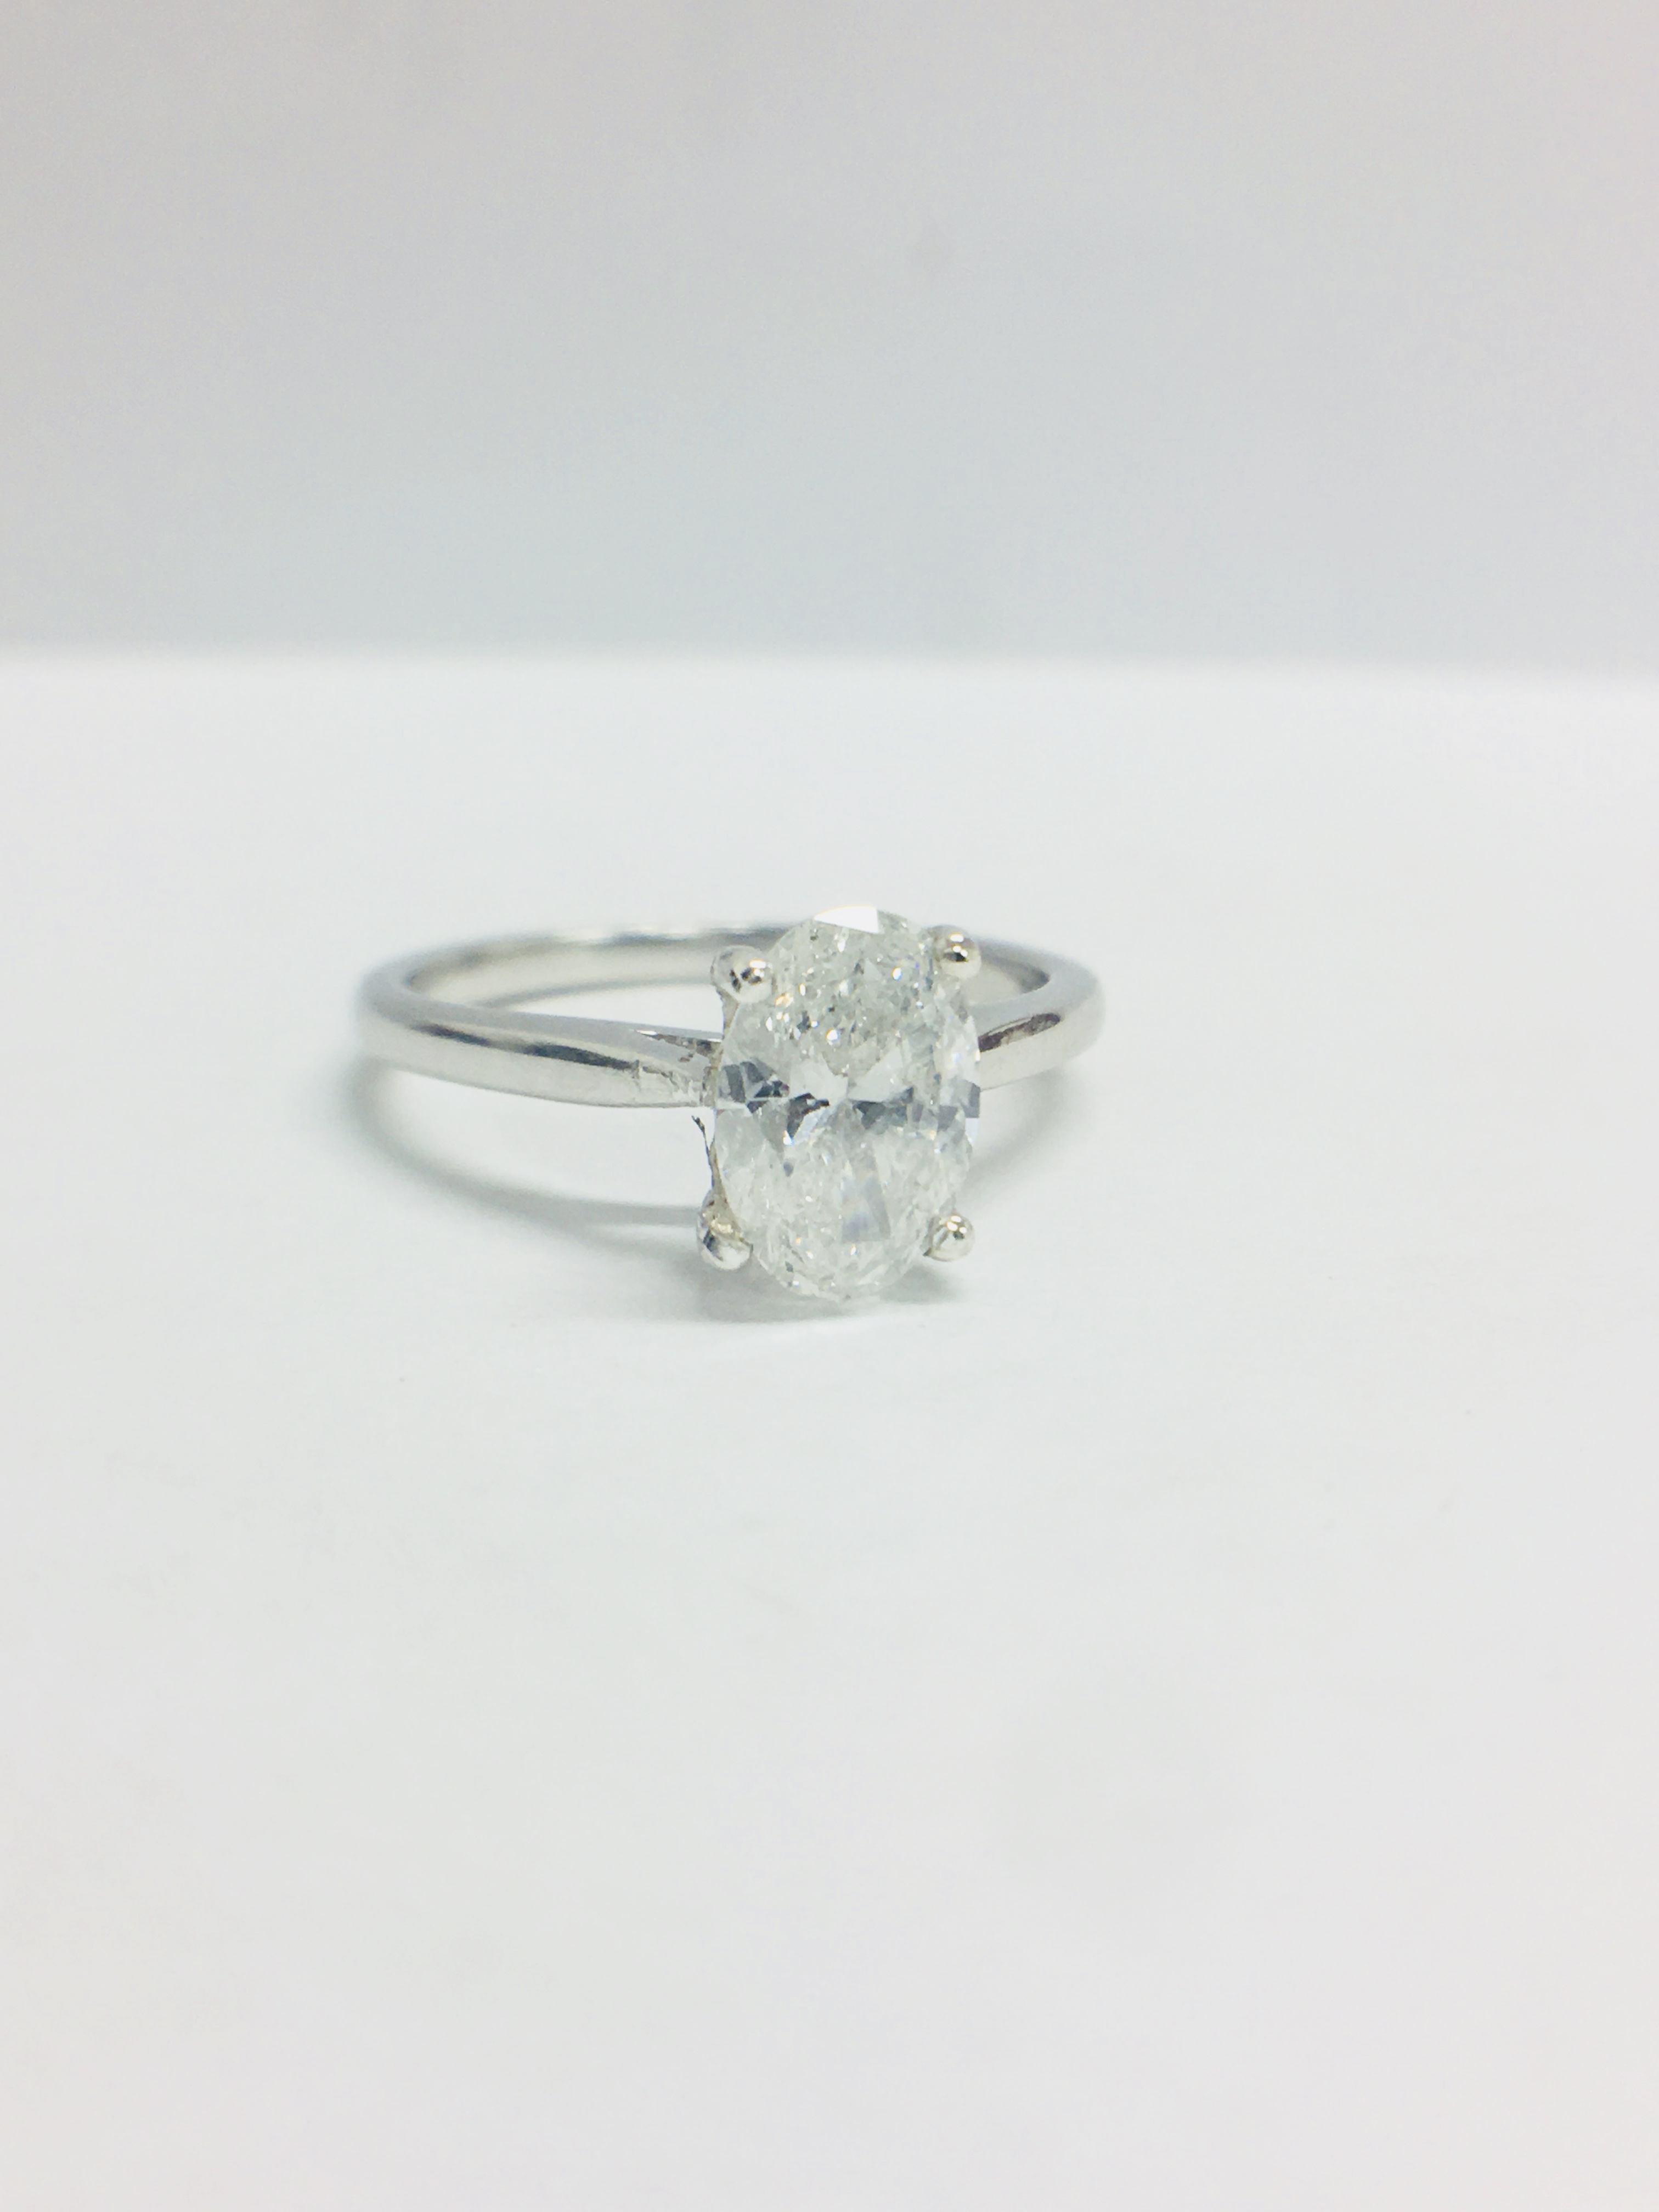 Platinum Oval Cut Diamond Solitaire Ring, - Image 8 of 9